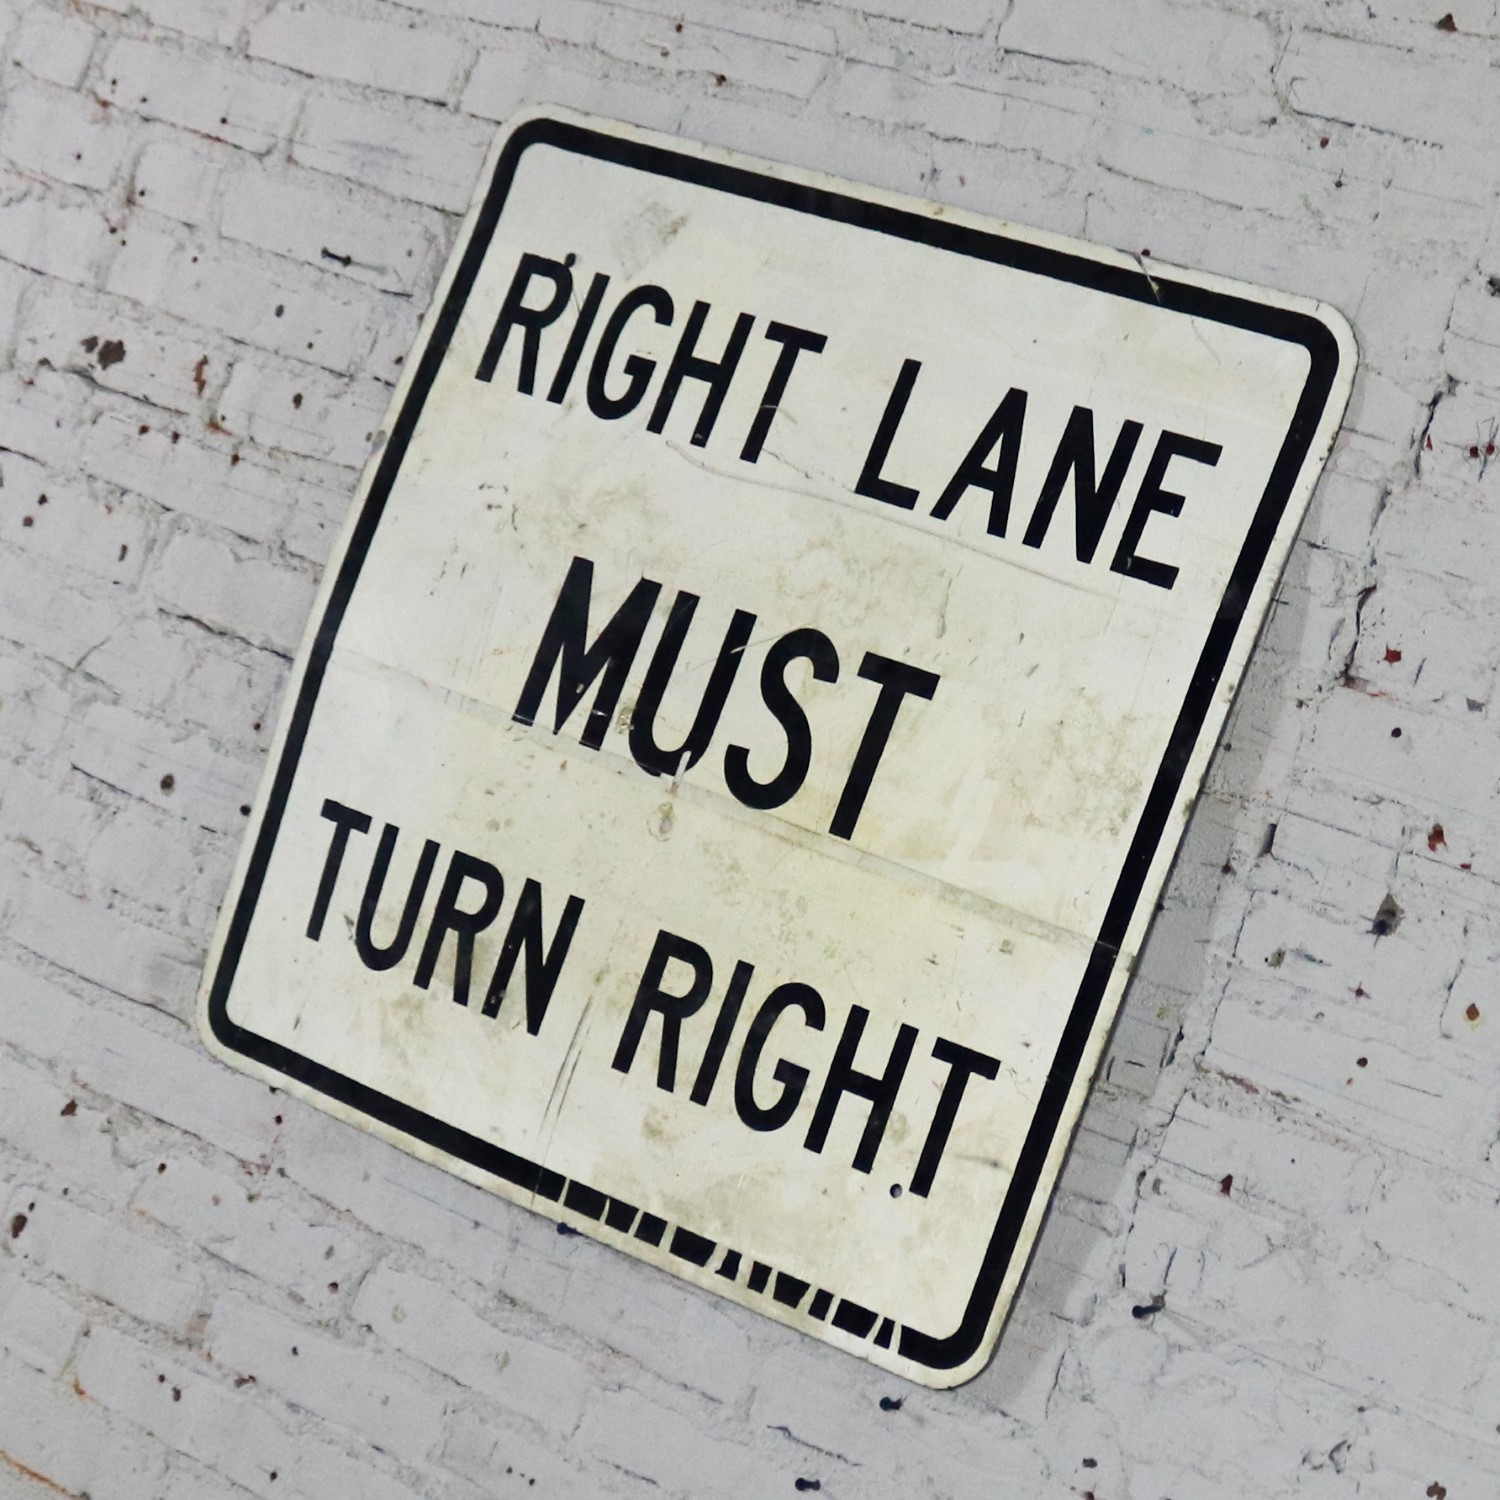 Vintage Right Lane Must Turn Right Large Steel Traffic Sign